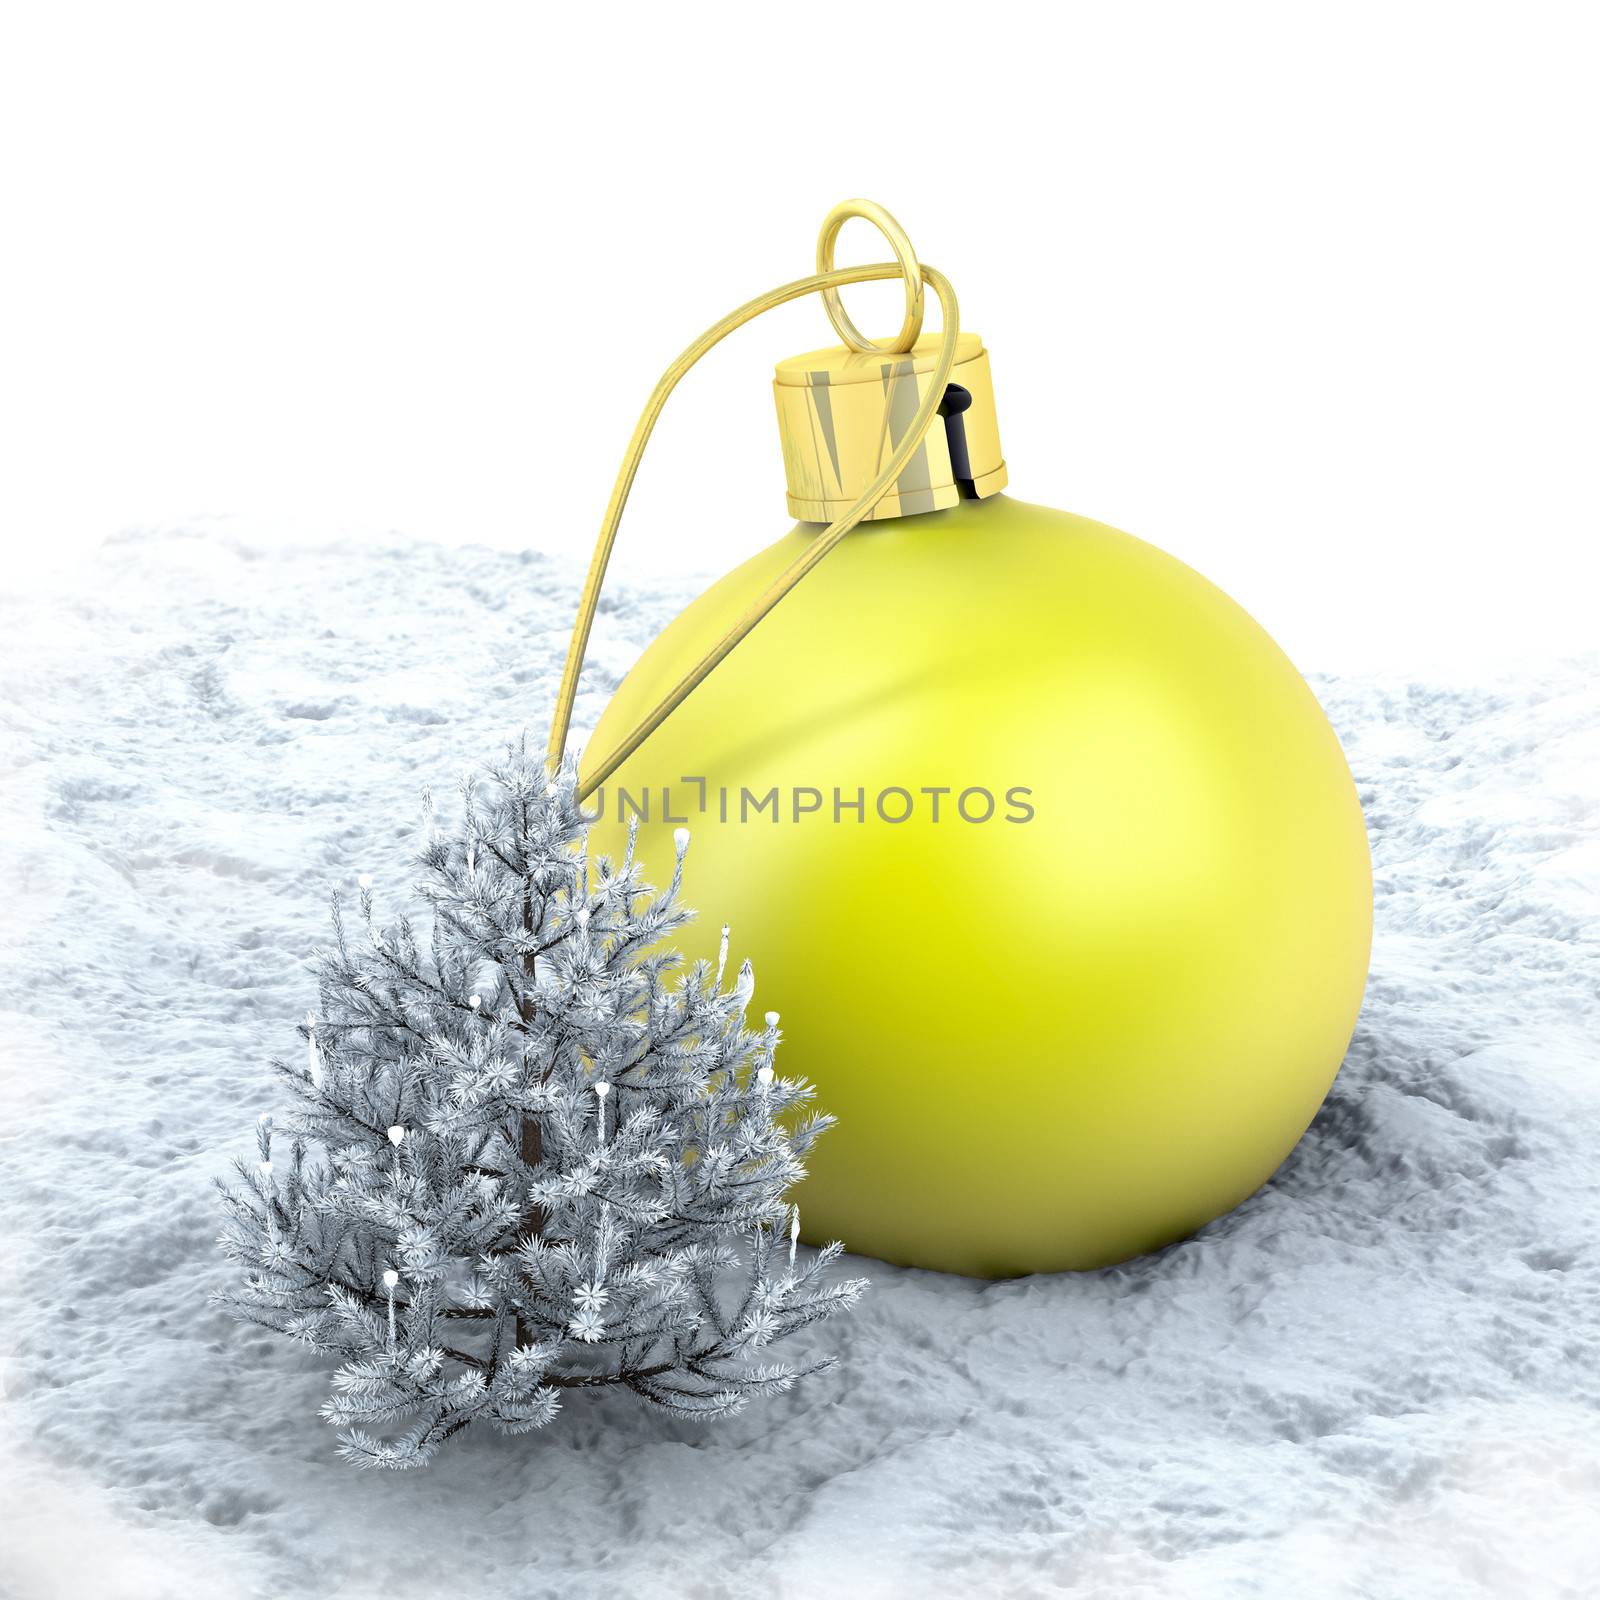 One yellow christmas ball and a small tree on a snowy ground